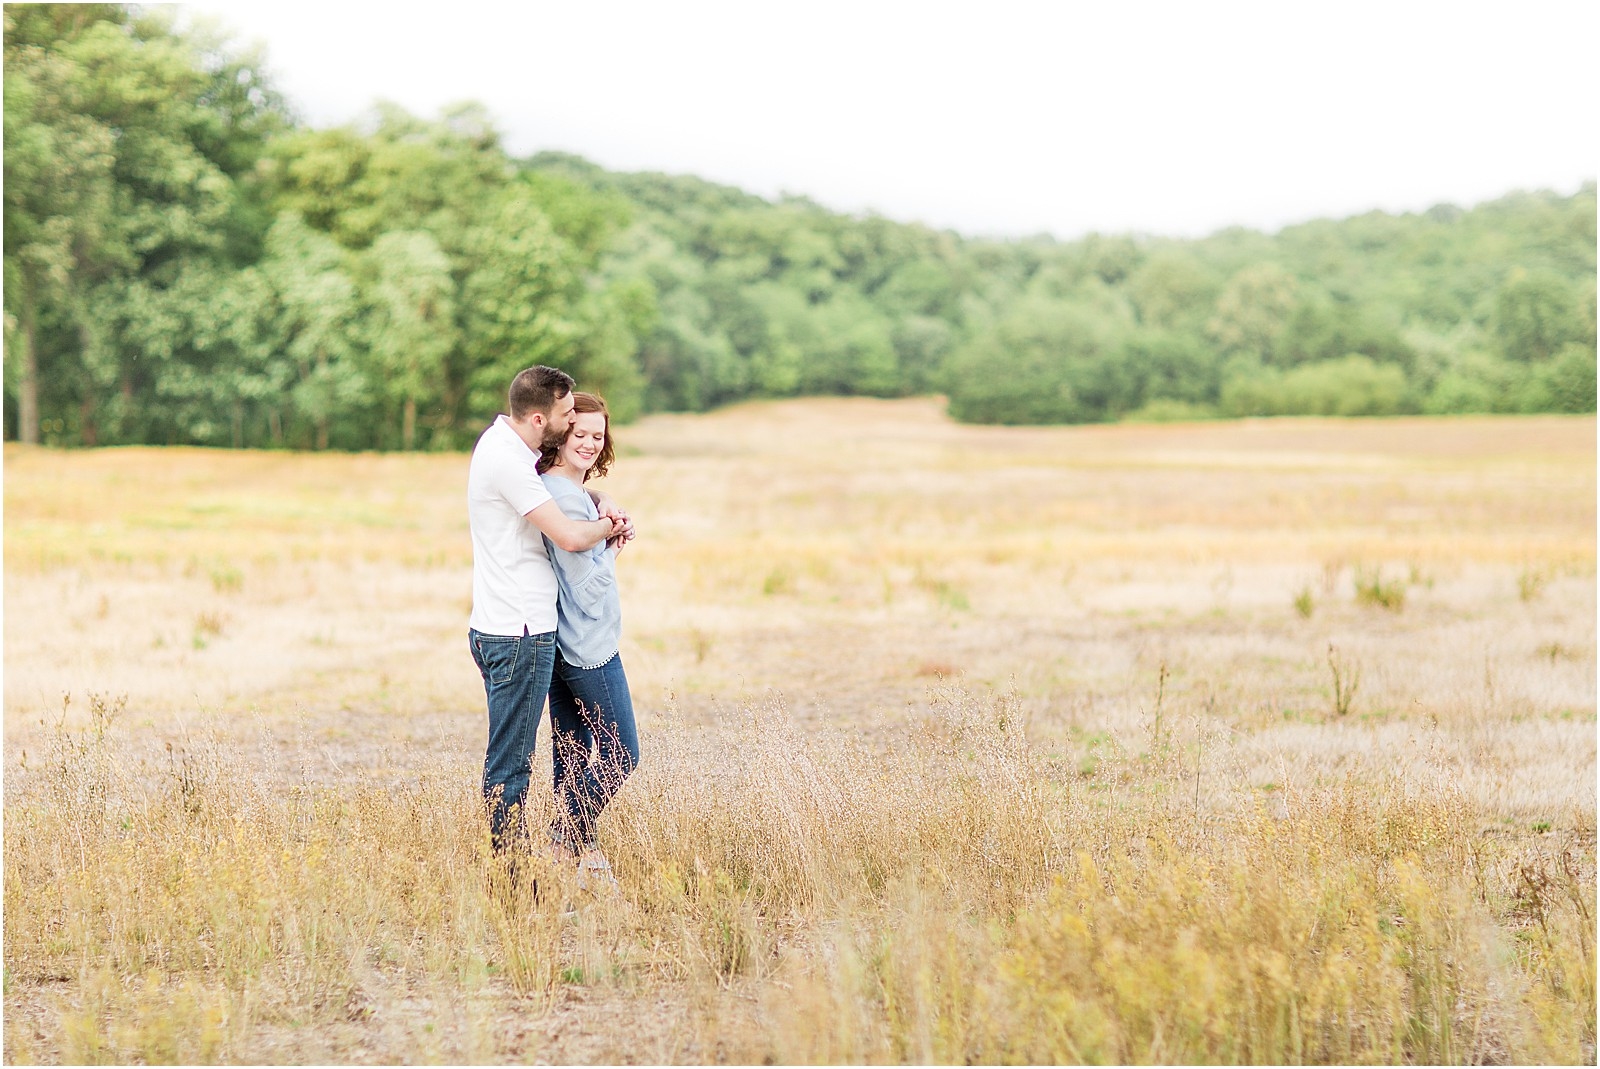 Amy and Logan | The Corner House Bed and Breakfast | Engagement Session006.jpg